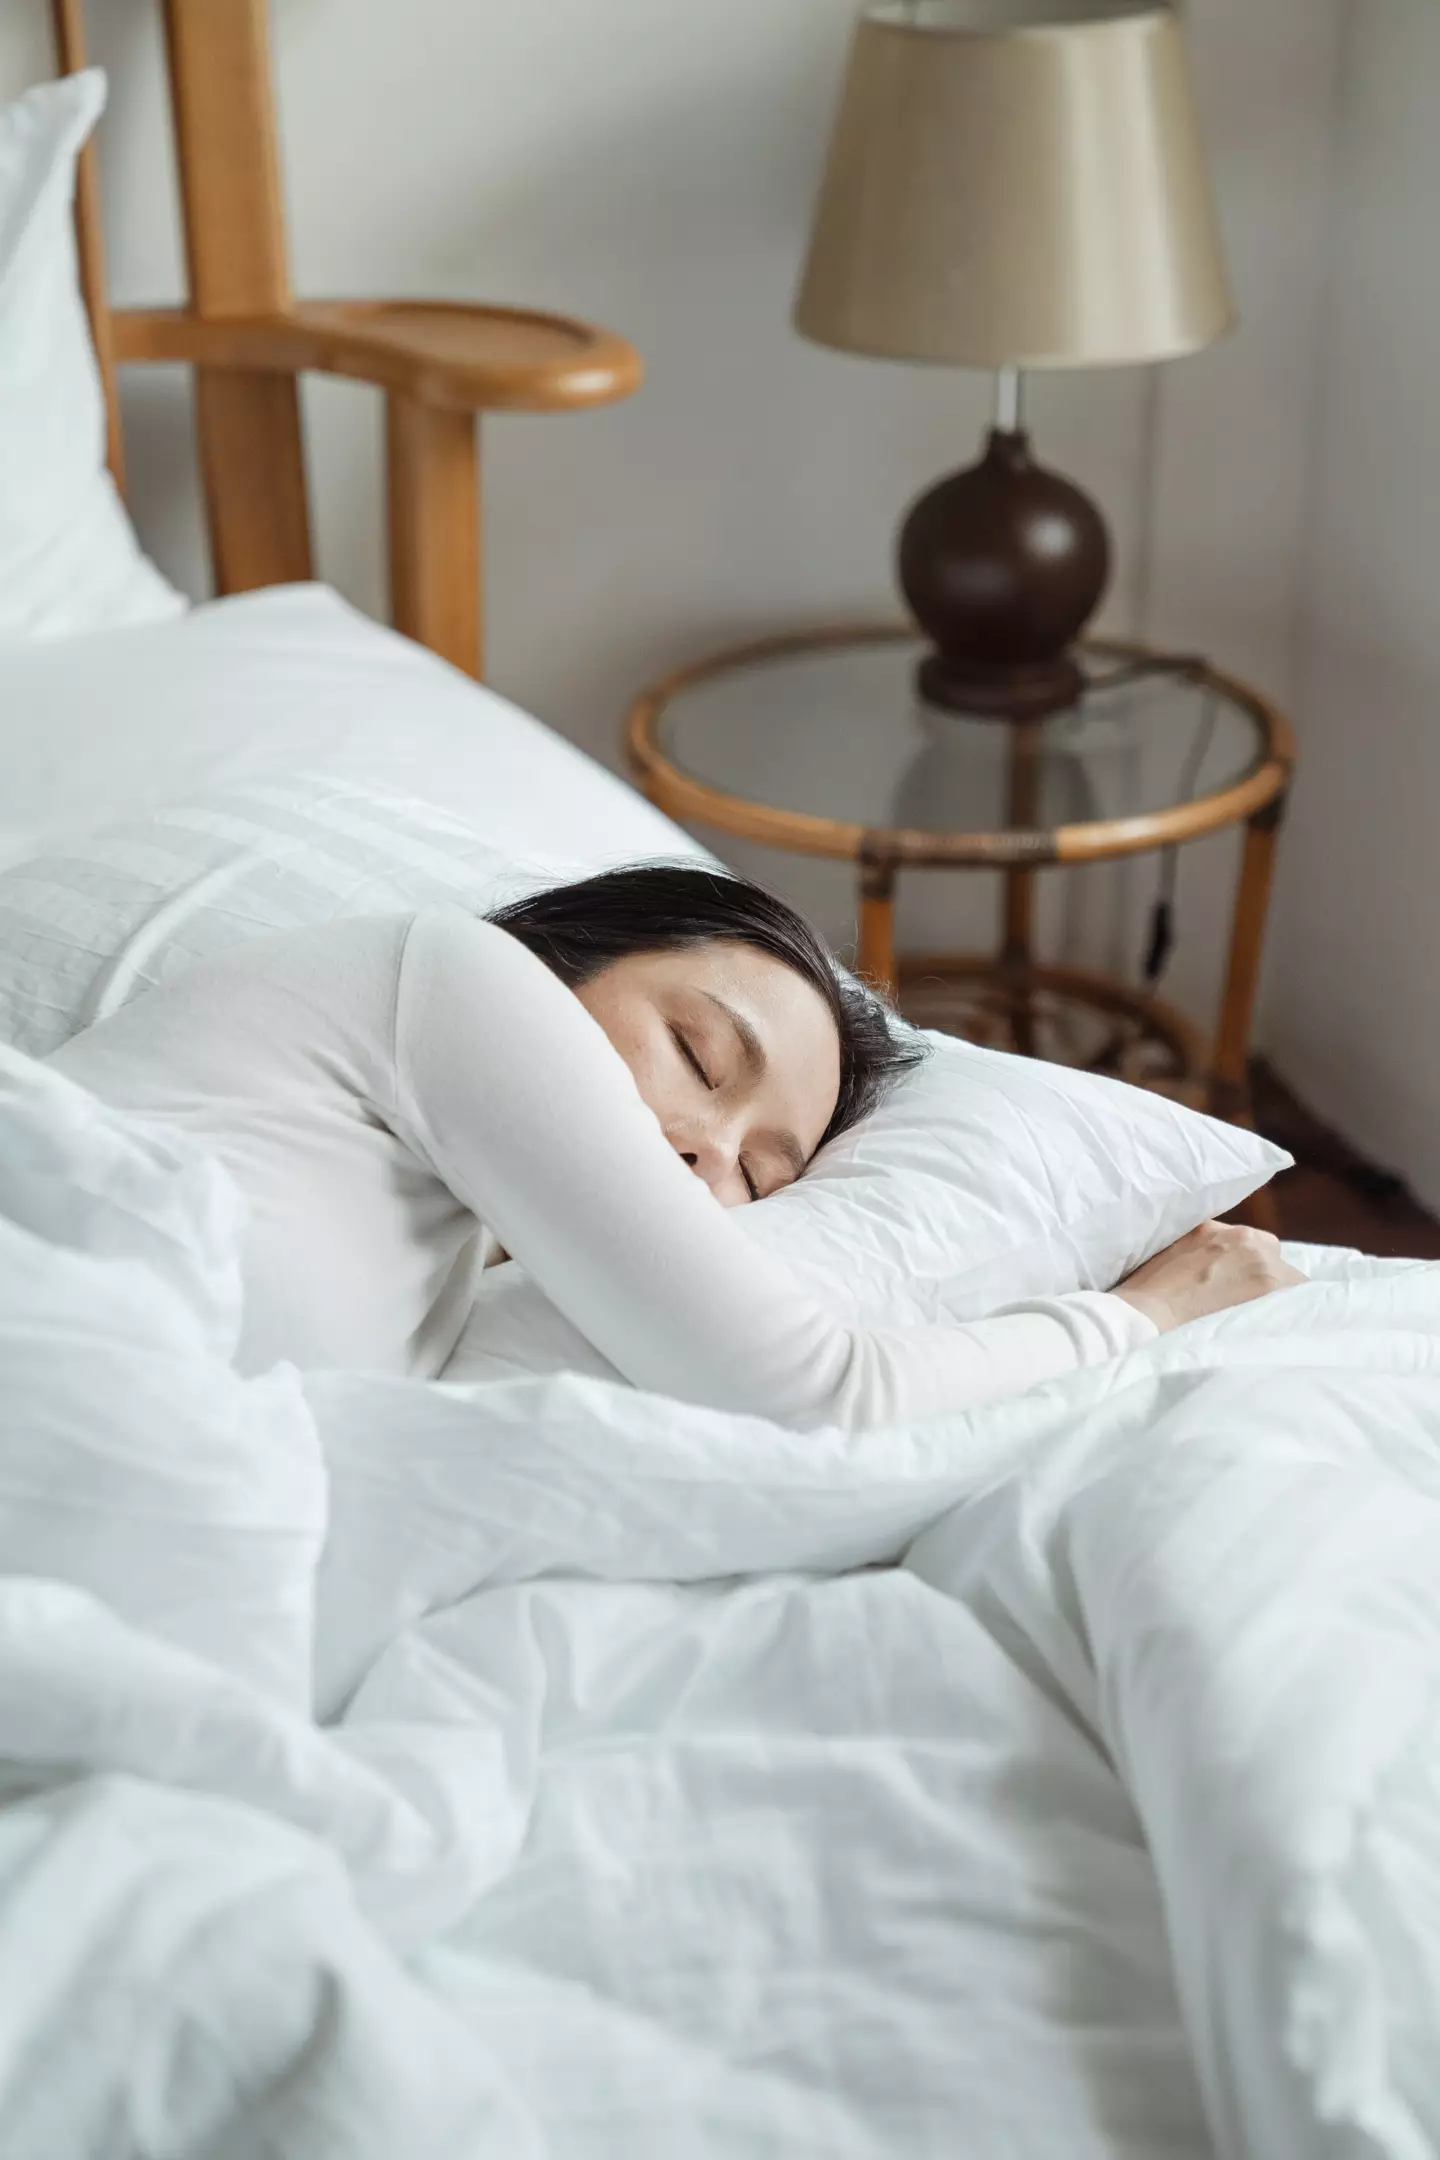 Almost one in five in the UK aren’t getting enough sleep, latest research suggests.